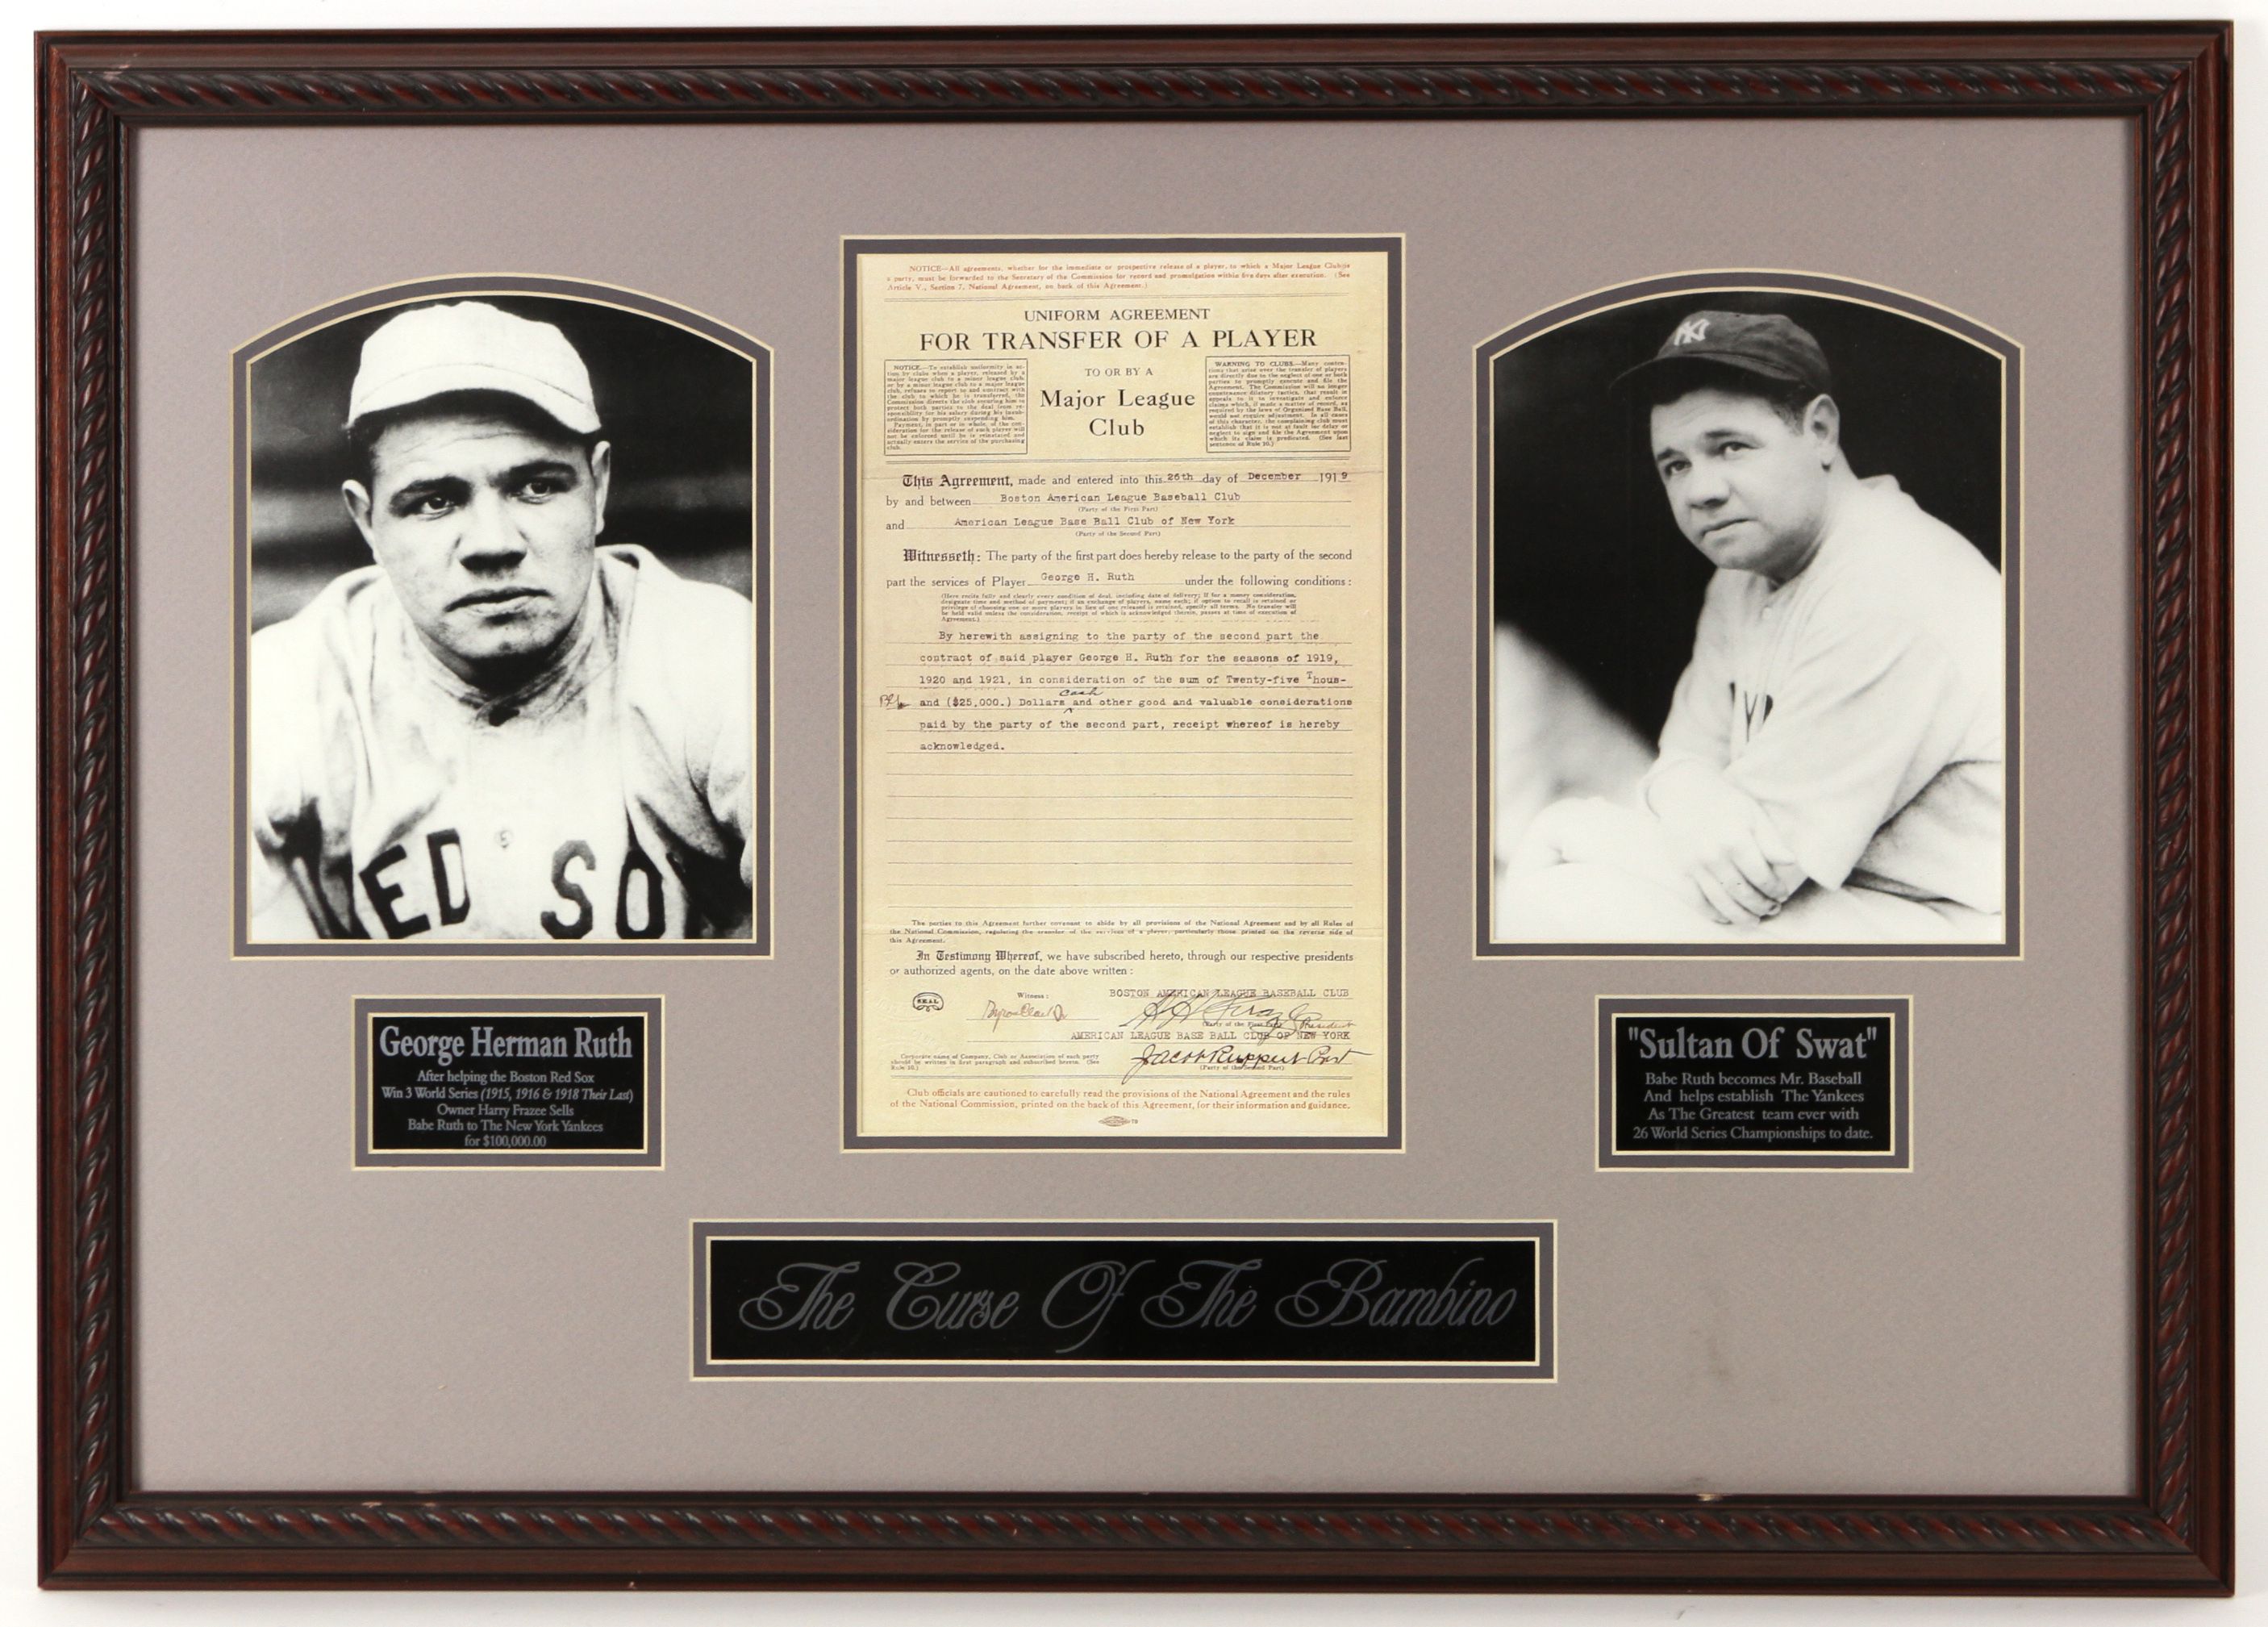 What should the Yankees do with Velazquez, Wade when r babe ruth yankees  jersey egulars return?